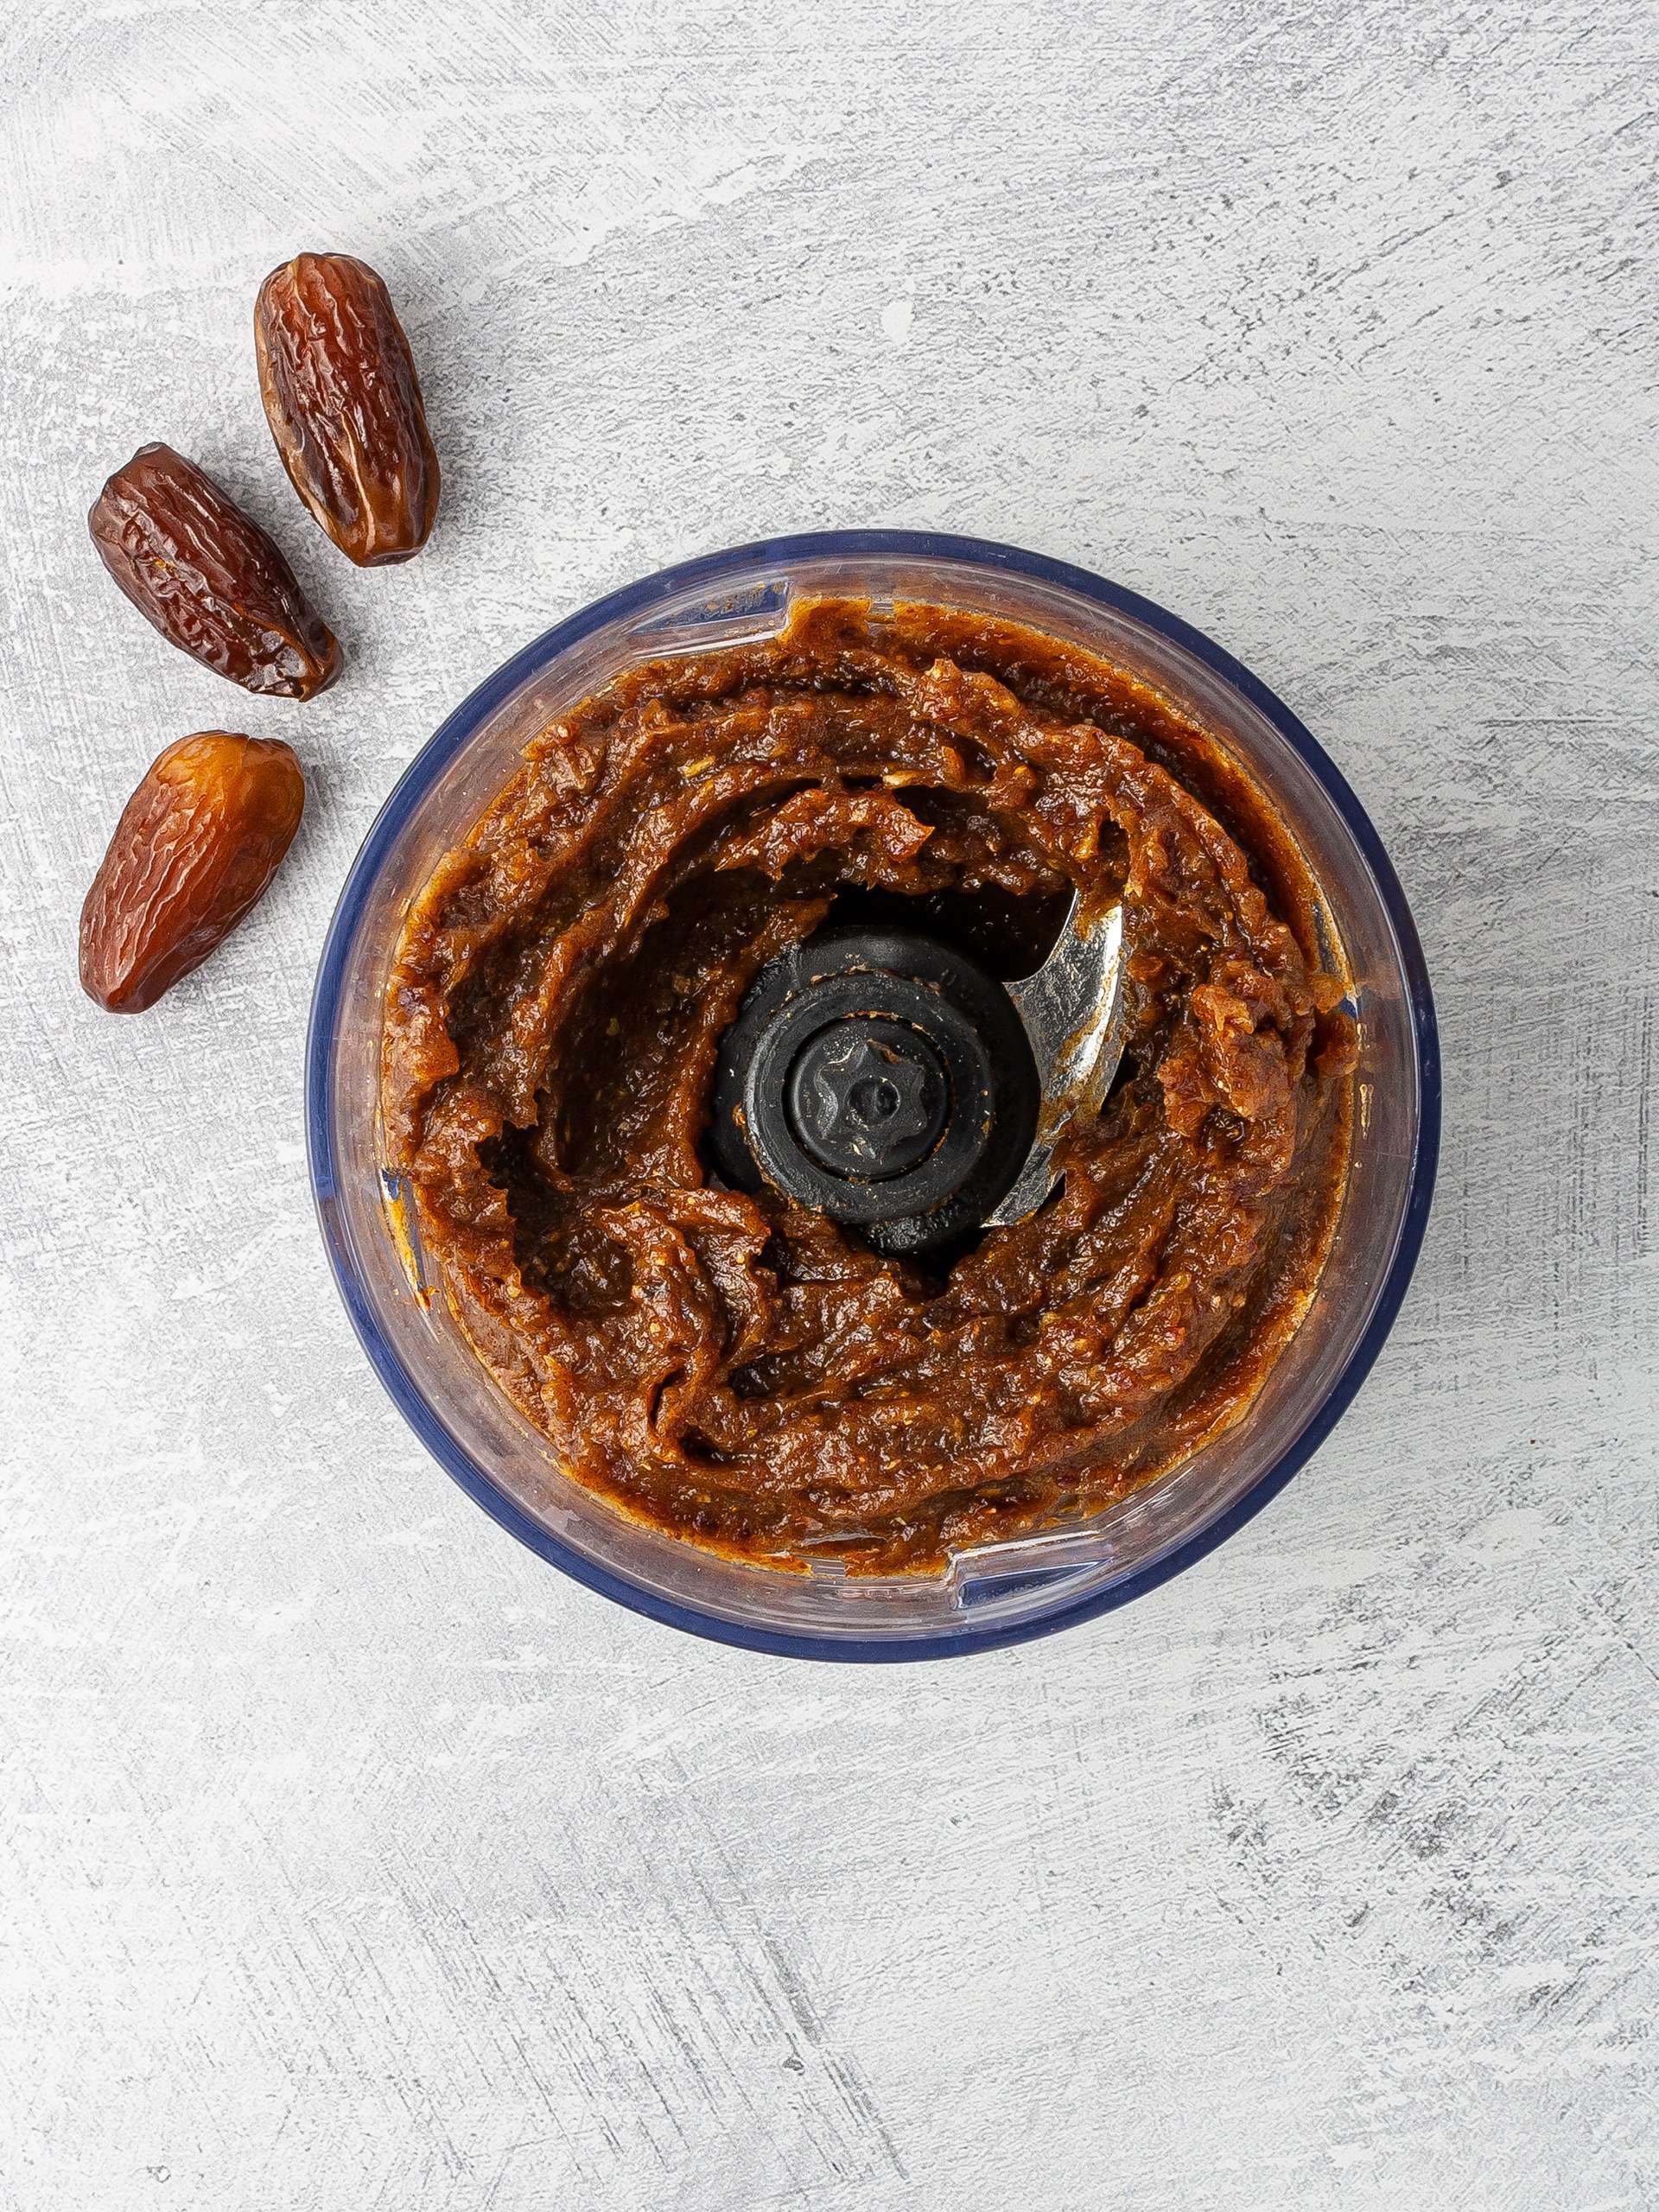 Date paste made with dates and water in a food processor.